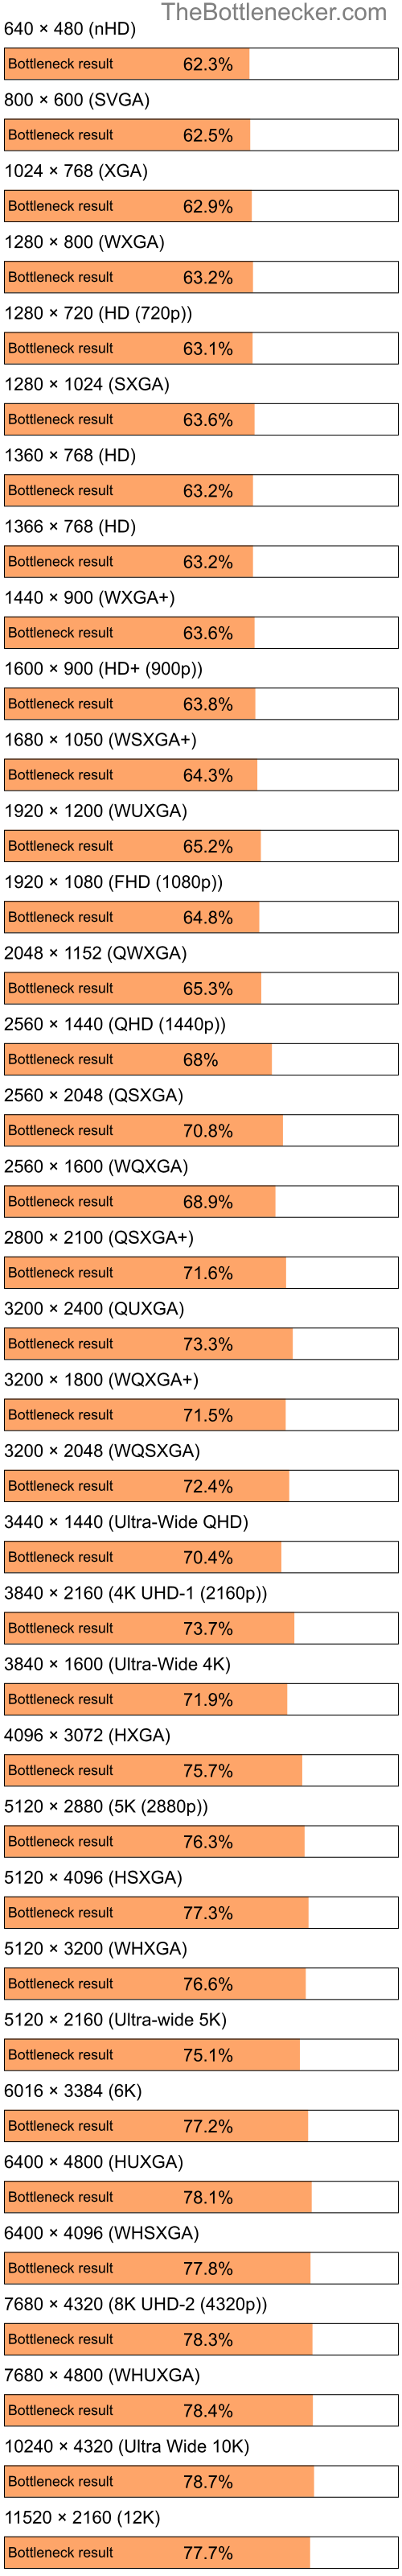 Bottleneck results by resolution for Intel Celeron and AMD Mobility Radeon HD 3430 in General Tasks